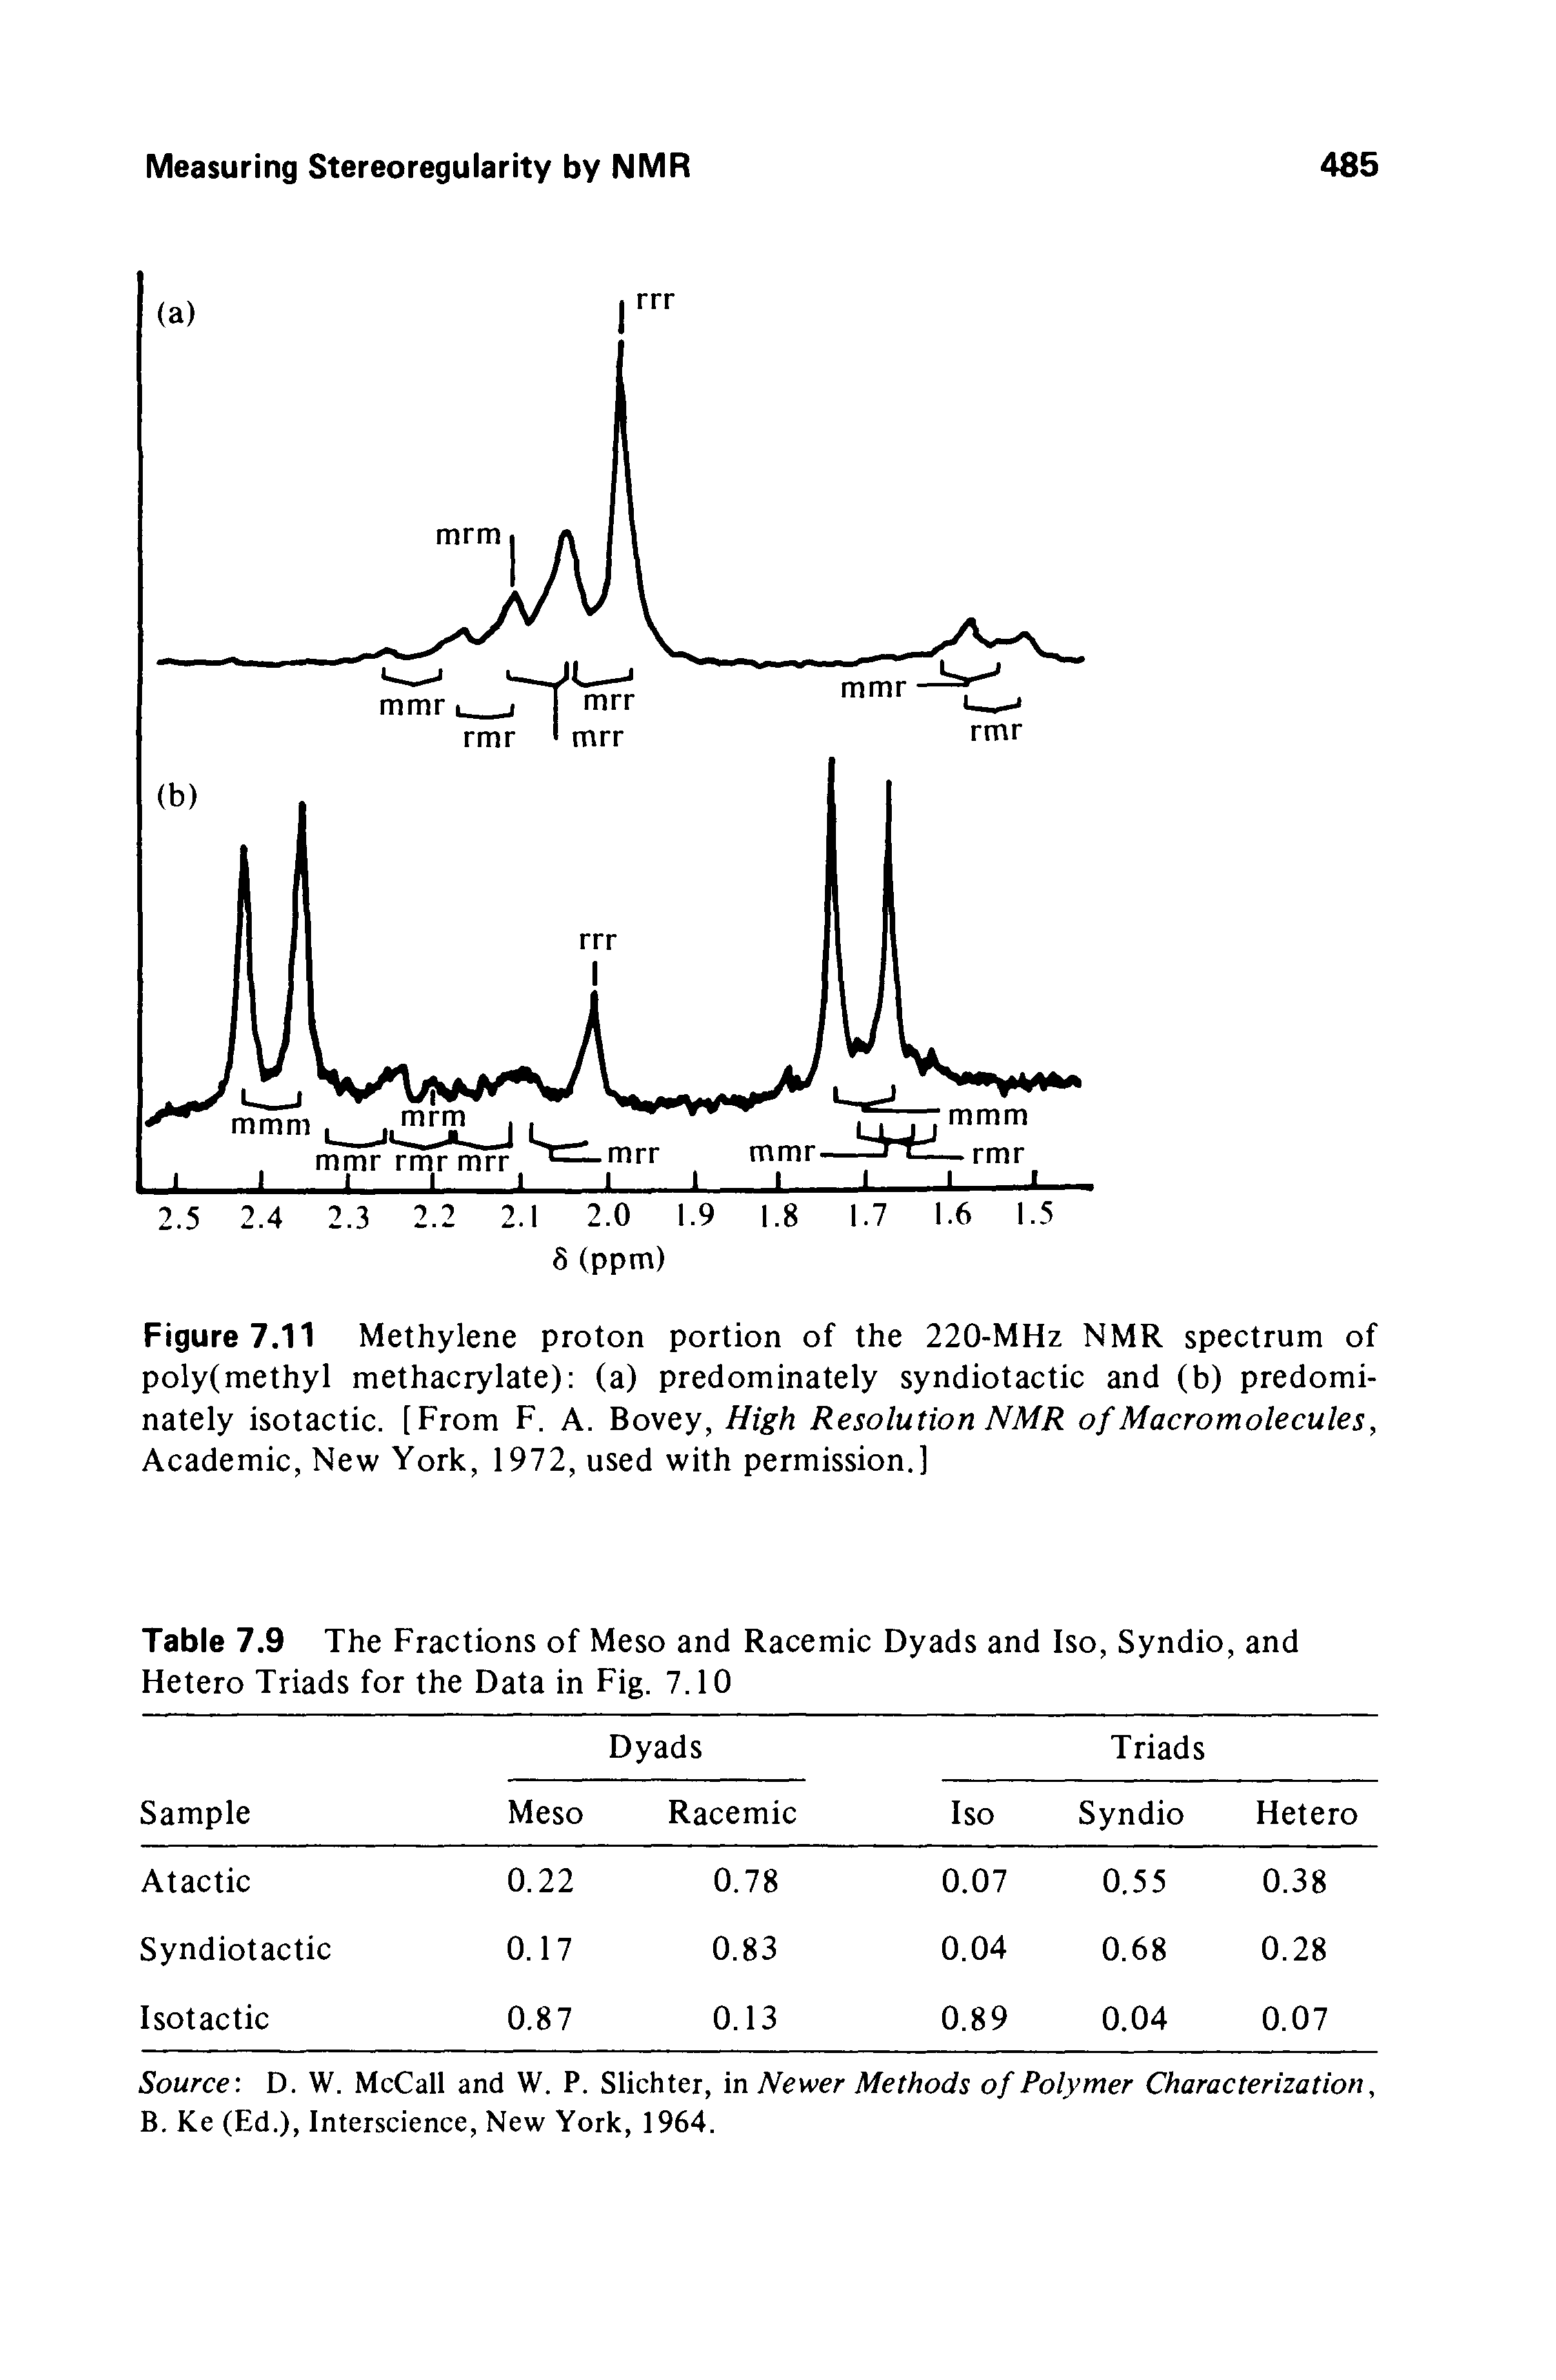 Figure 7.11 Methylene proton portion of the 220-MHz NMR spectrum of poly(methyl methacrylate) (a) predominately syndiotactic and (b) predominately isotactic. [From F. A. Bovey, High Resolution NMR of Macro molecules, Academic, New York, 1972, used with permission.]...